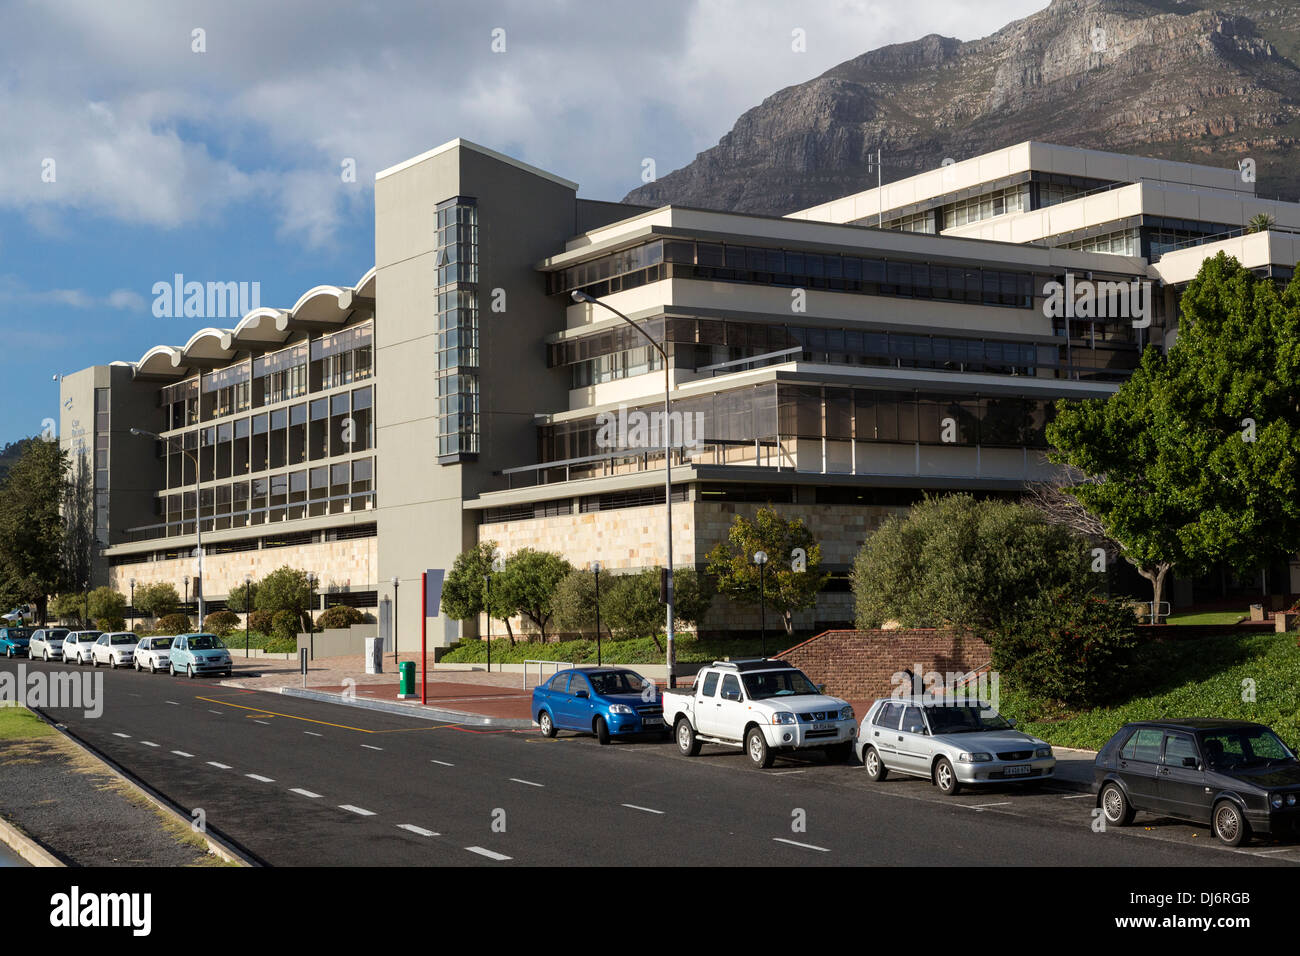 South Africa, Cape Town. Cape Peninsula University of Technology. Stock Photo